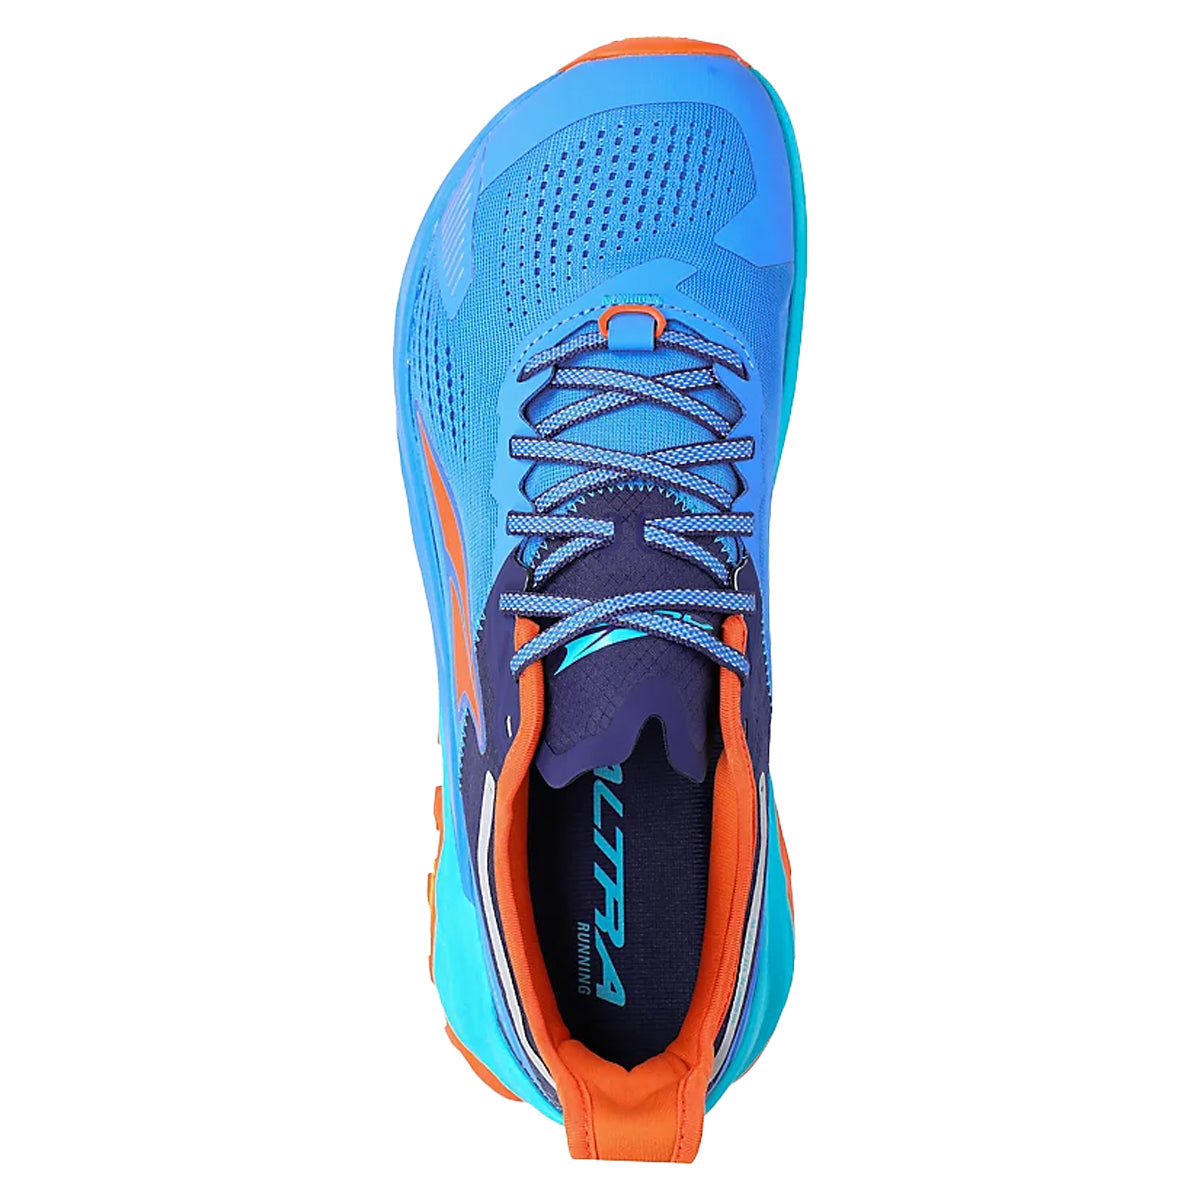 Altra Olympus 5 in Blue by GOHUNT | Altra - GOHUNT Shop